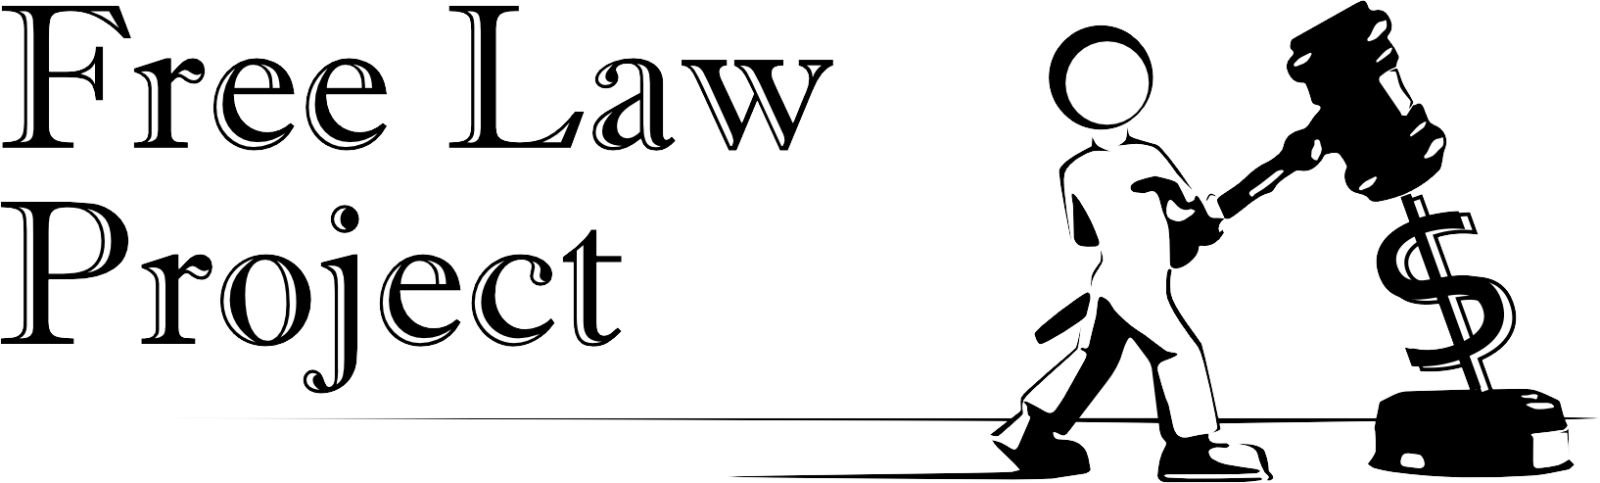 law clipart legal study